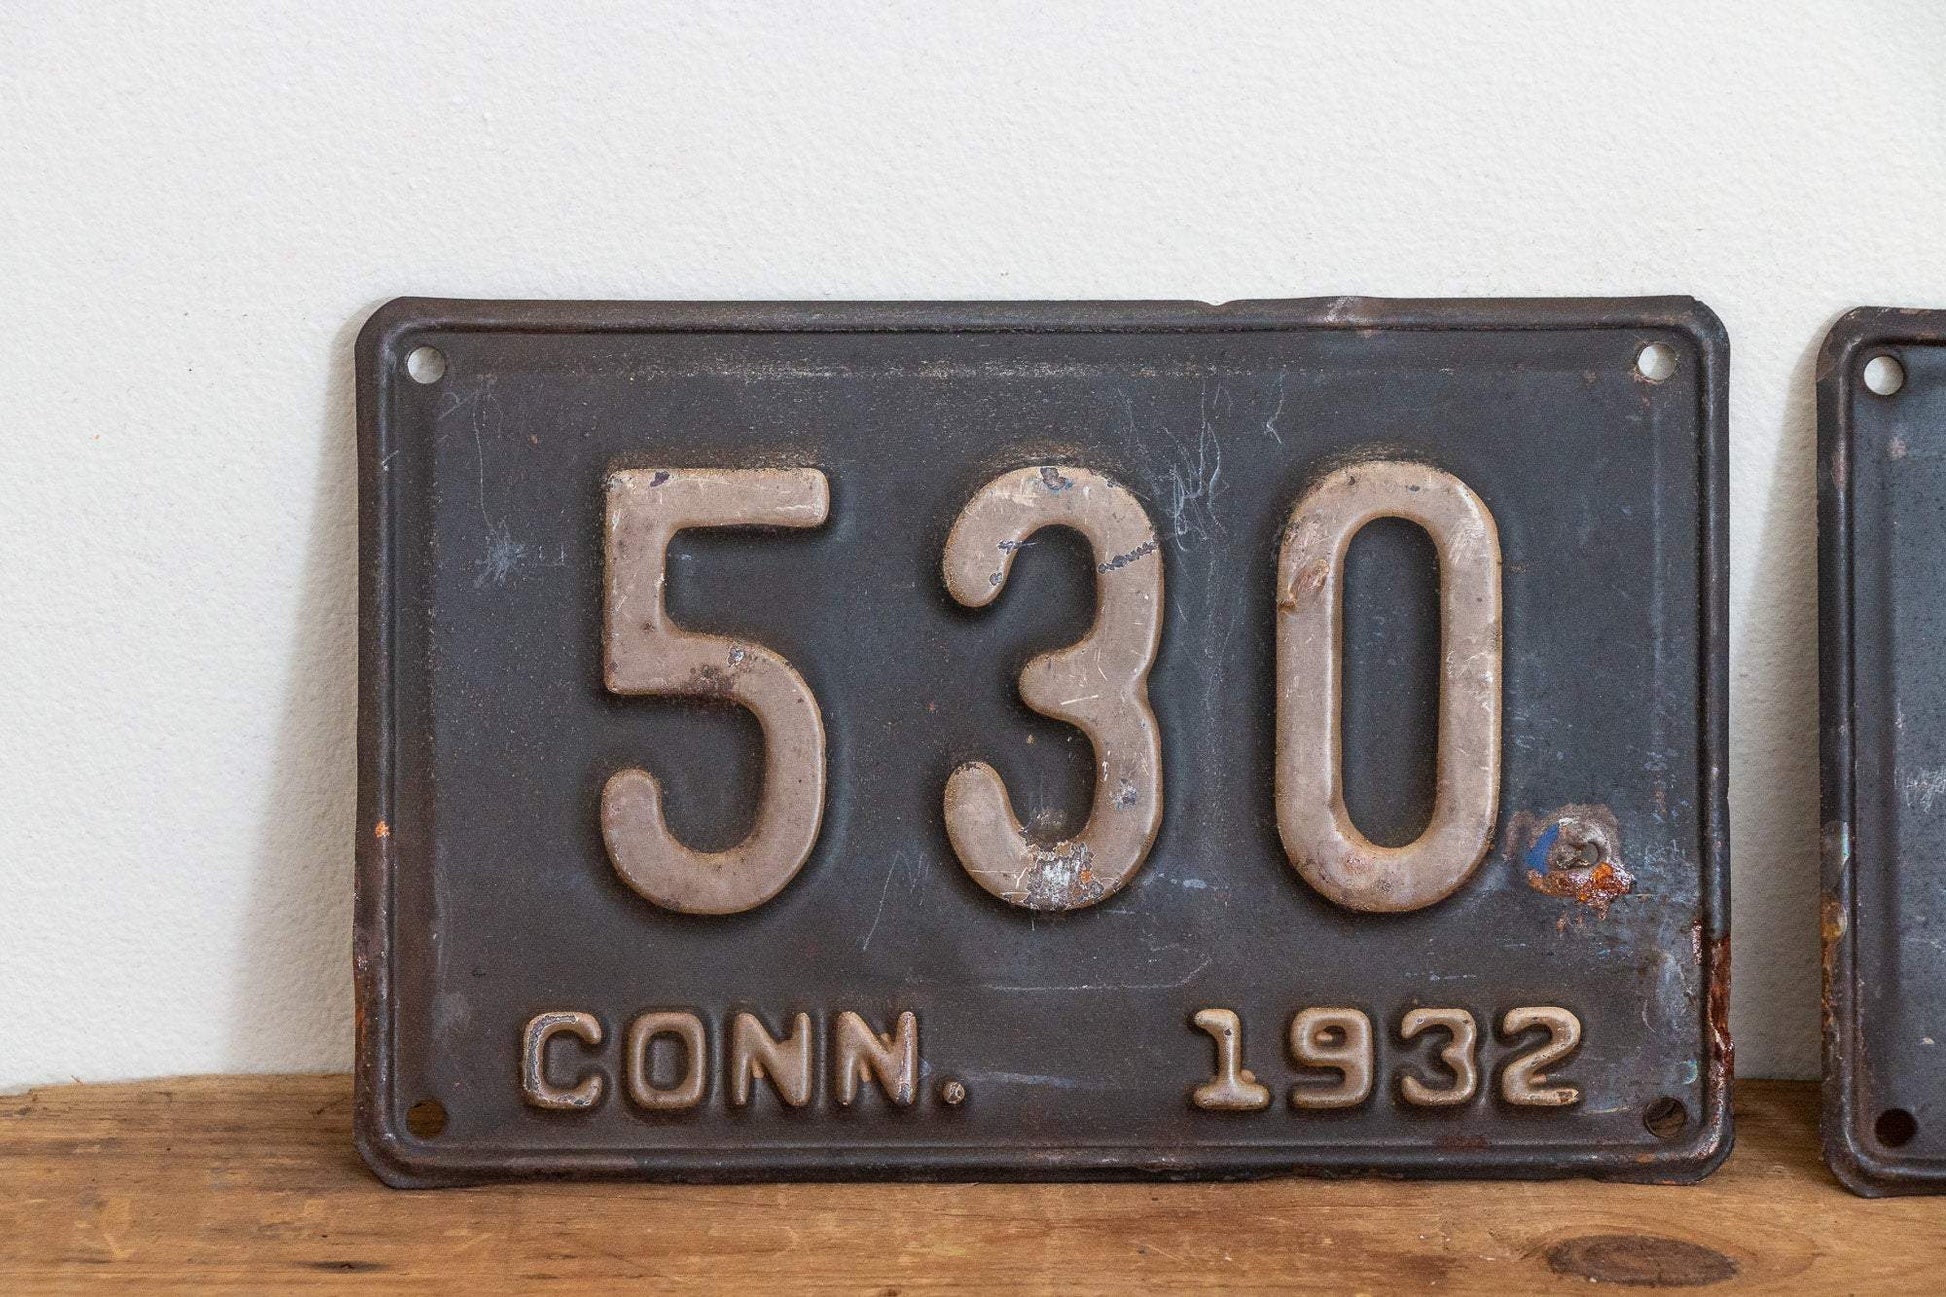 530 Connecticut 1932 License Plate Pair 3 Digit Low Number Vintage Wall Decor - Eagle's Eye Finds